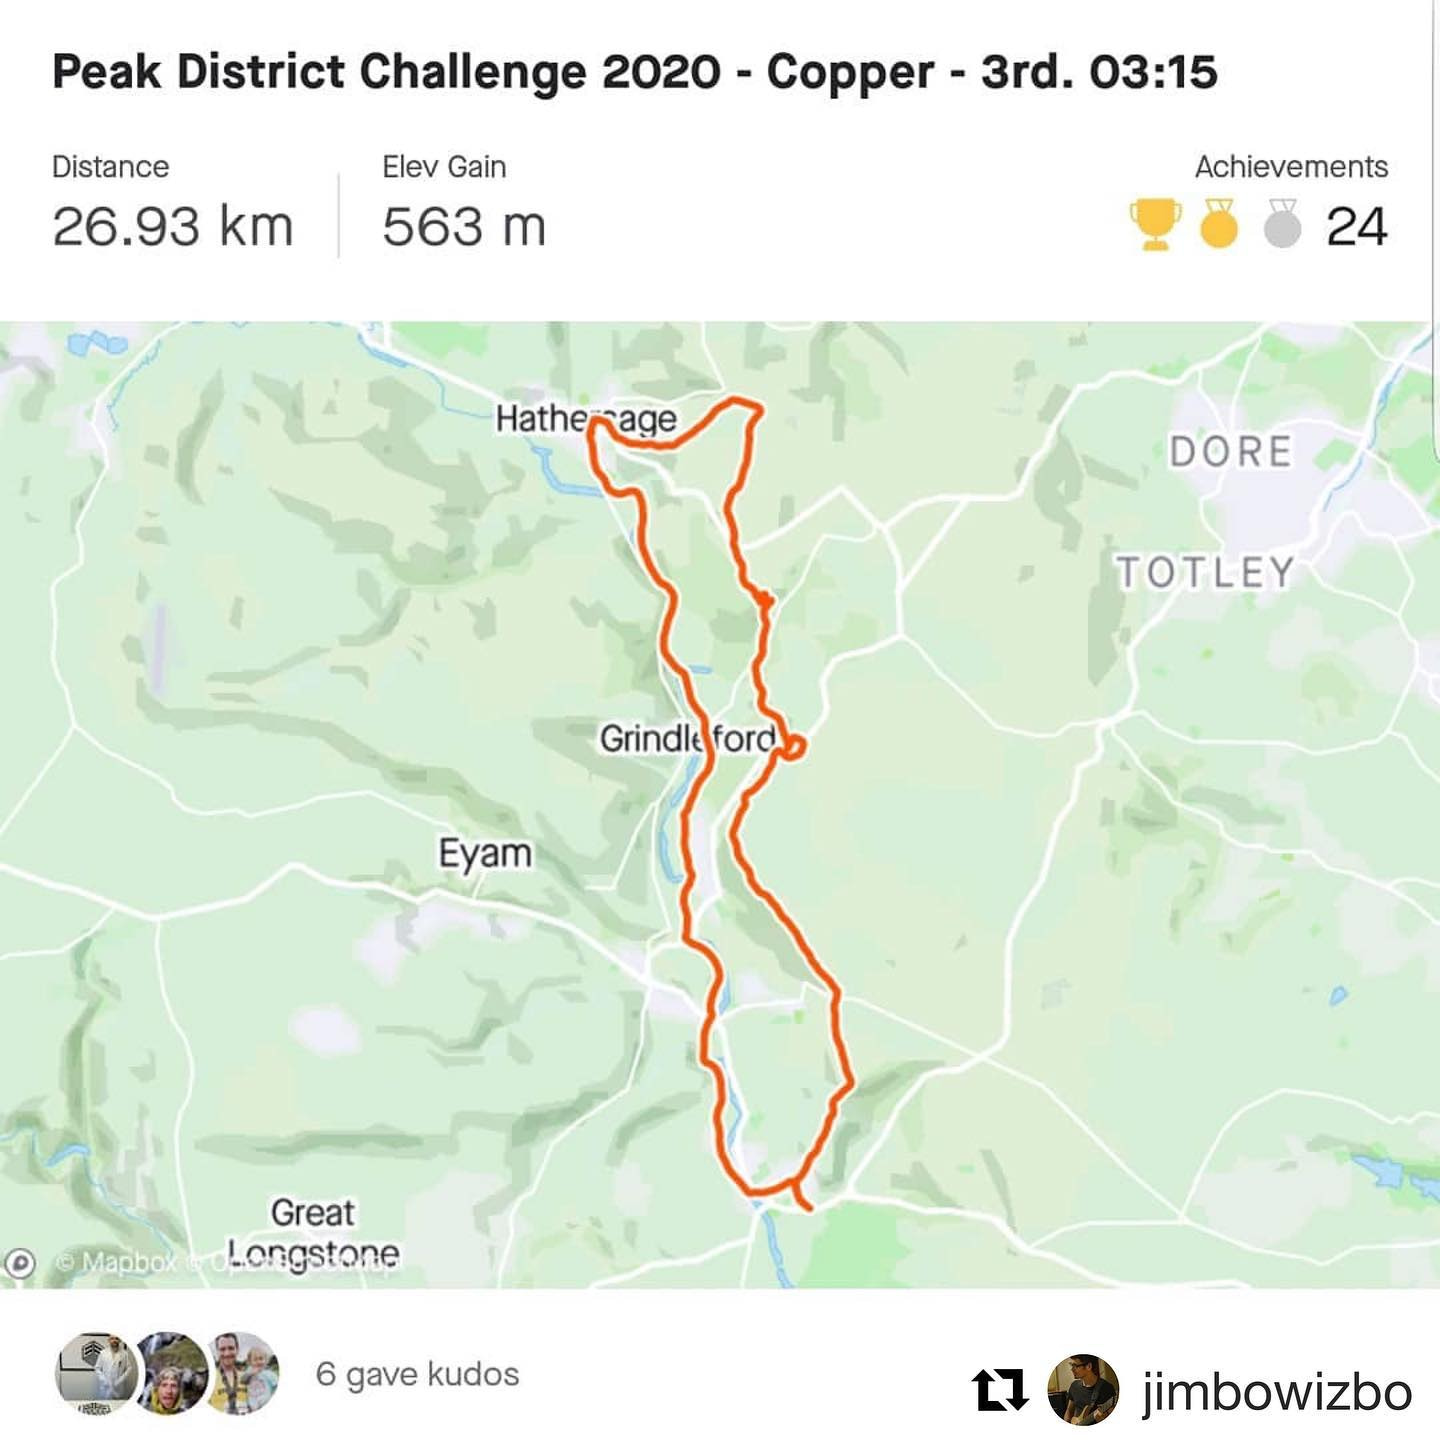 Repost from @jimbowizbo who’s already planning for next years Challenge, great work! ⛰
#peakdistr...